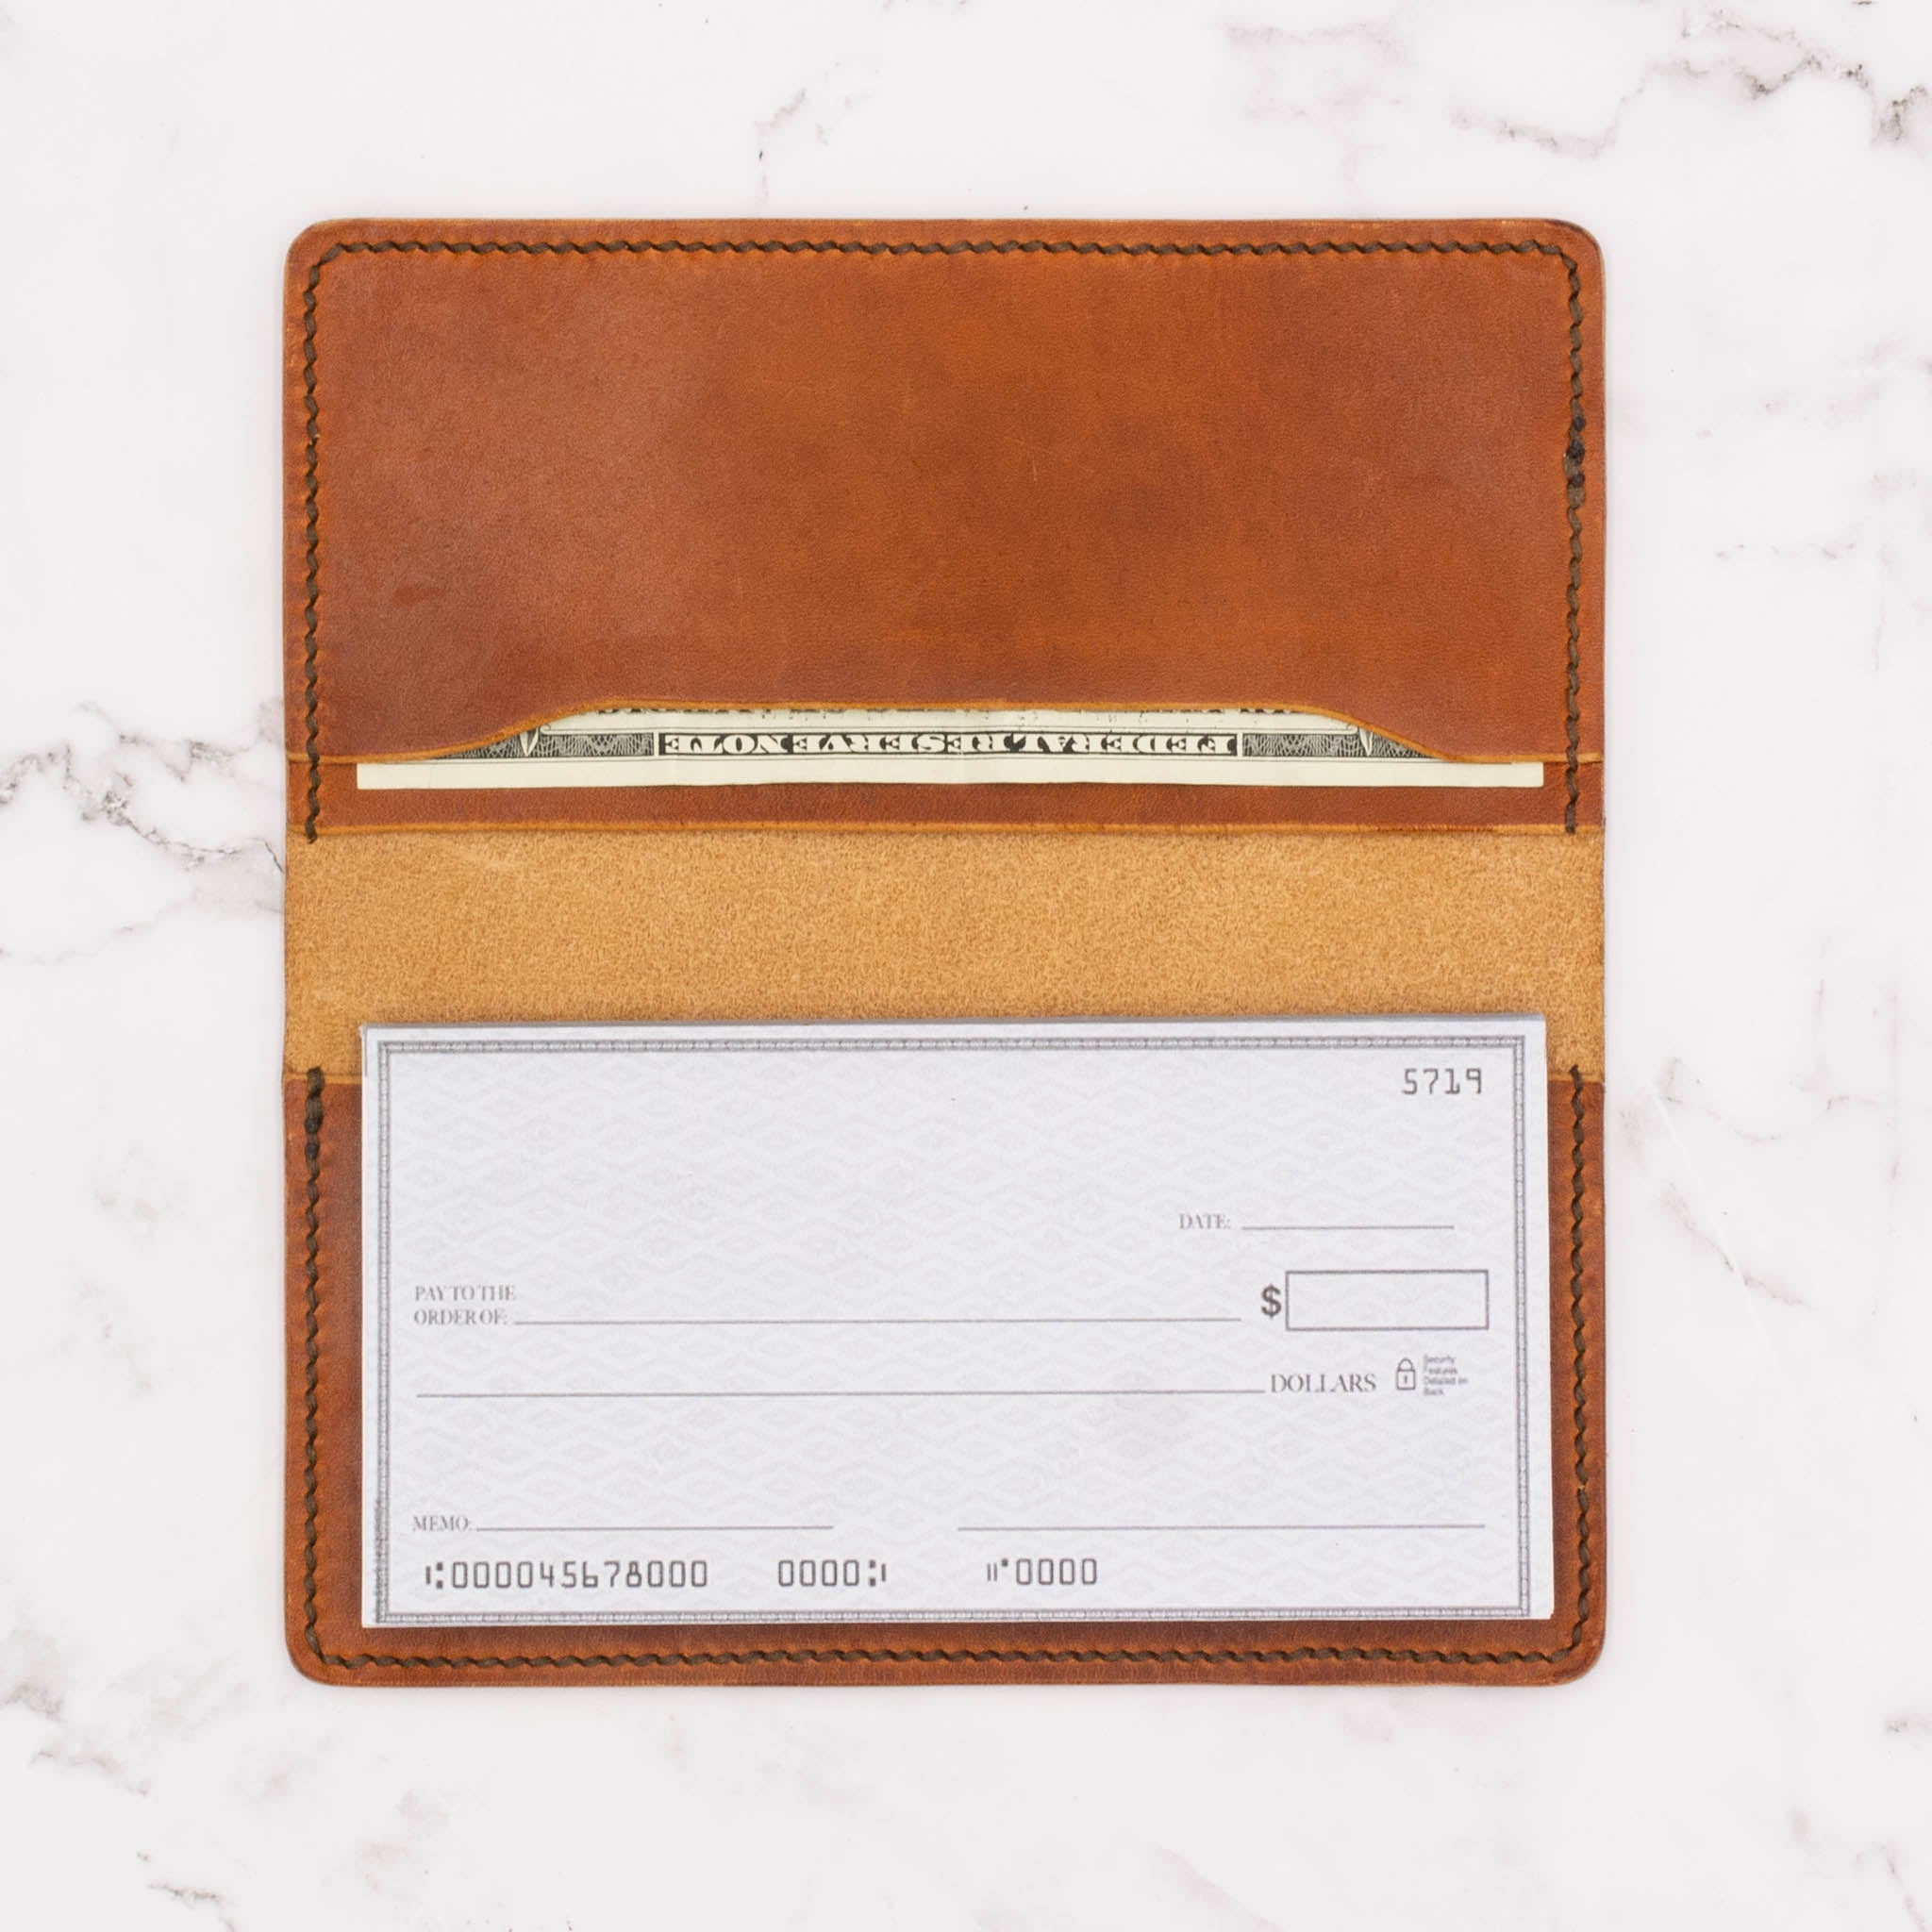 Tandy Leather Checkbook Cover Kit 4179-00